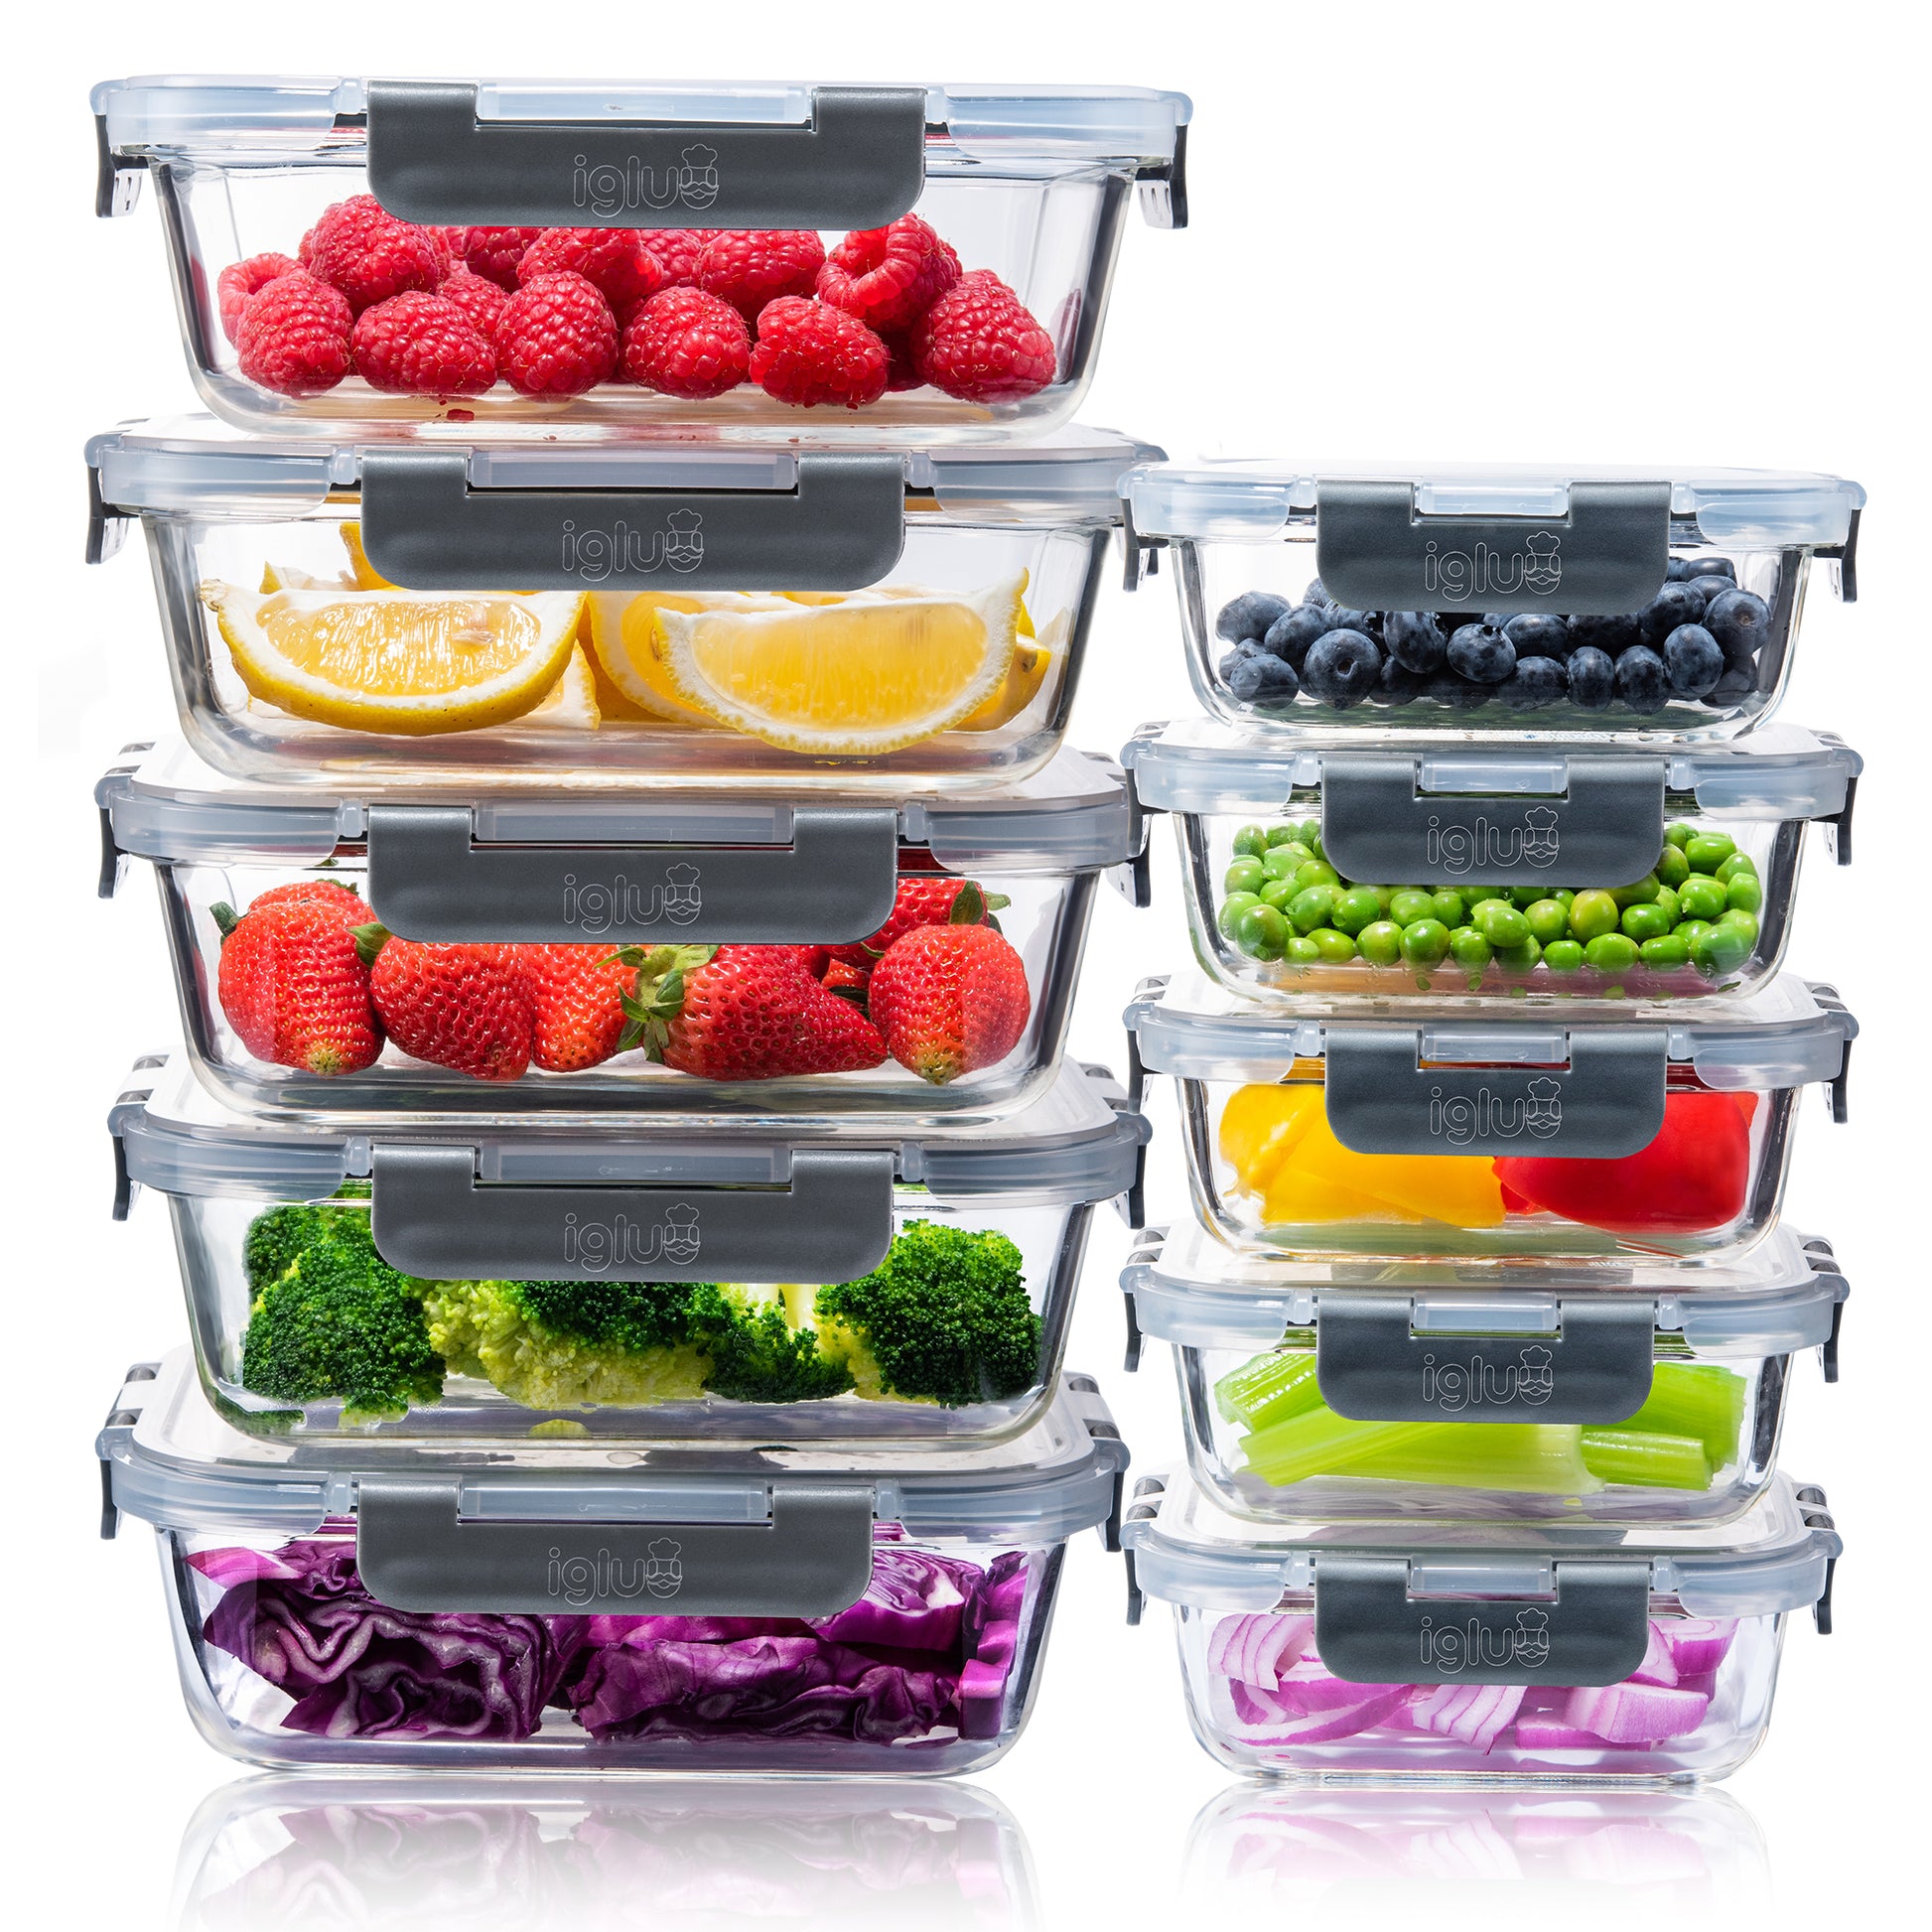 Igluu Meal Prep Round Plastic Containers - New Improved Lid - Reusable BPA  Free Food Containers with Airtight Lids - Microwavable, Freezer and